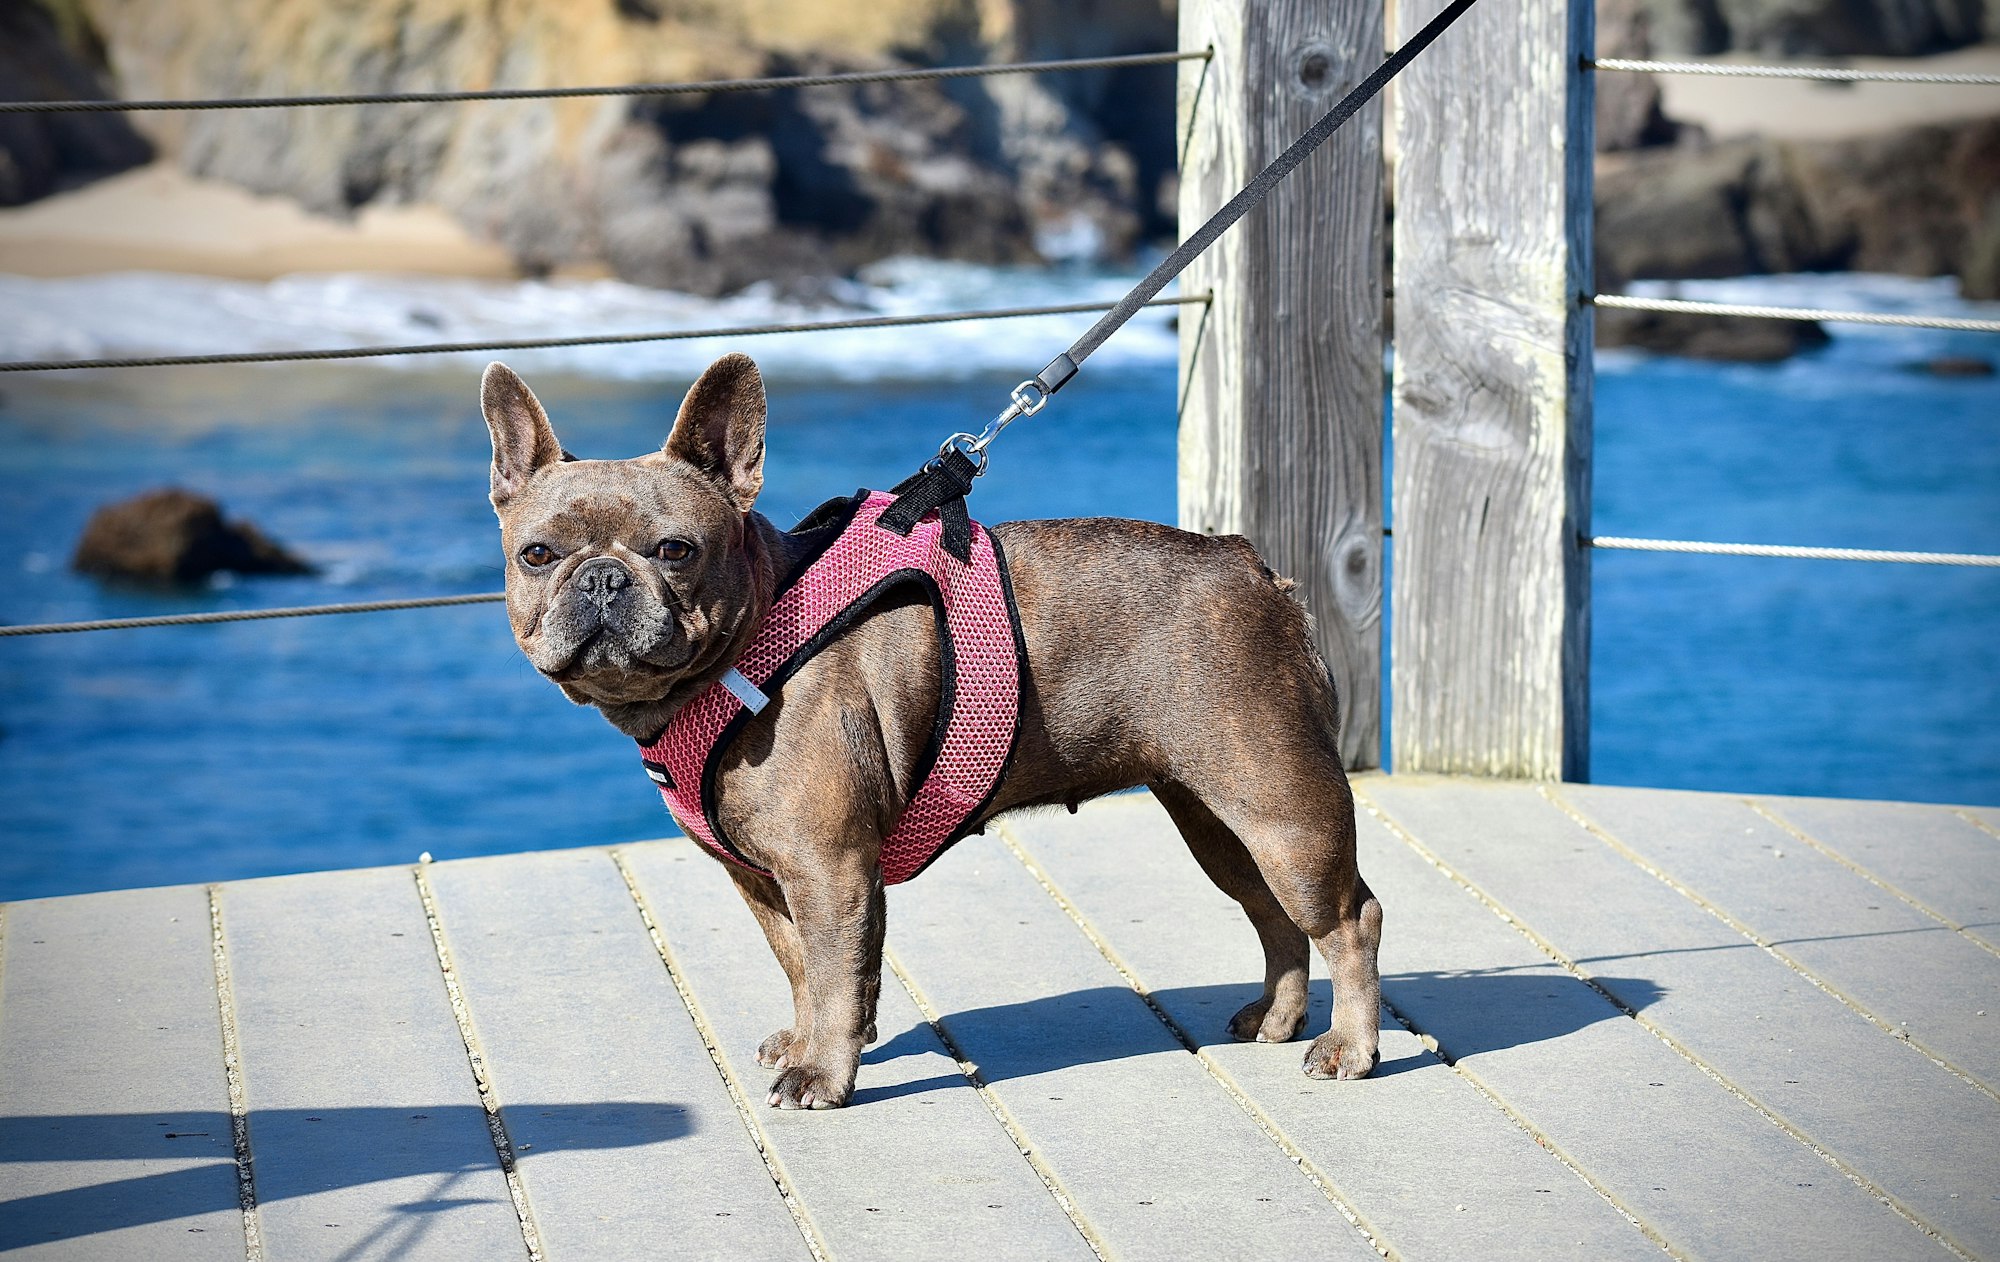 French bulldog with ocean view background during daytime 